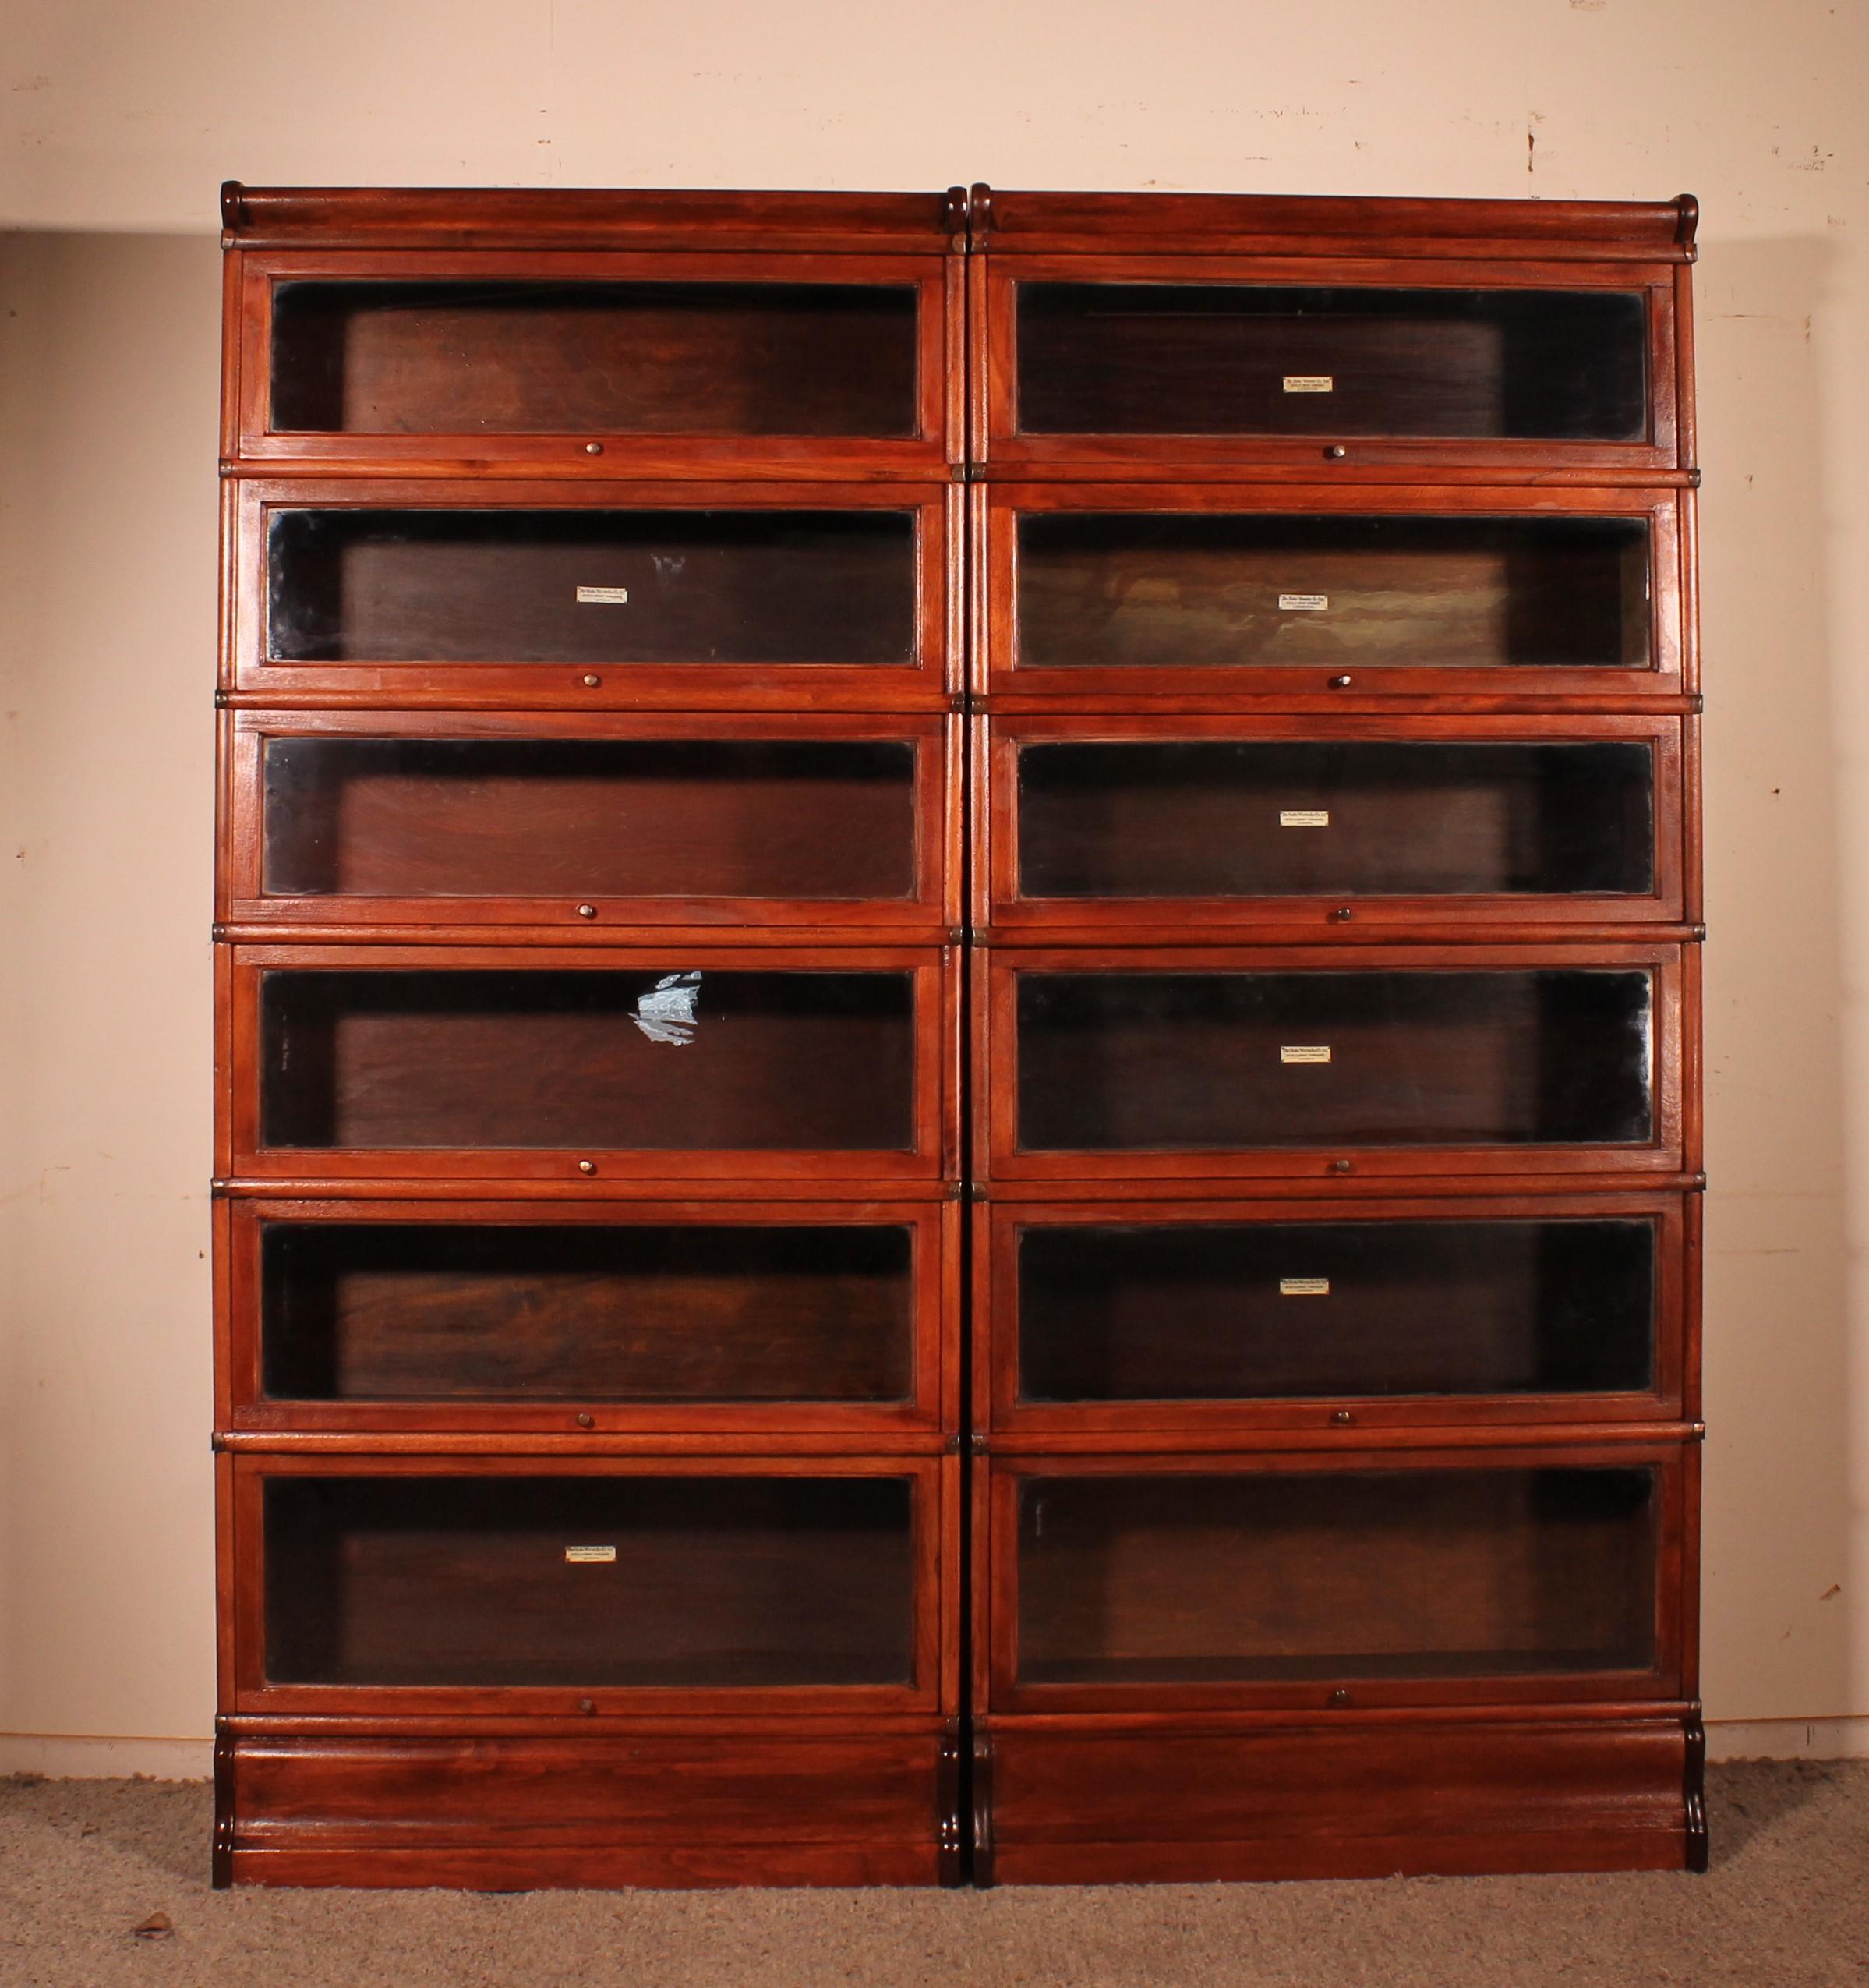 Elegant pair of Globe Wernicke London bookcases in mahogany from the end of the 19th century-beginning of the 20th century from England which is composed of two bookcases of 6 elements
It is unusual to find a pair which is composed of 6 elements